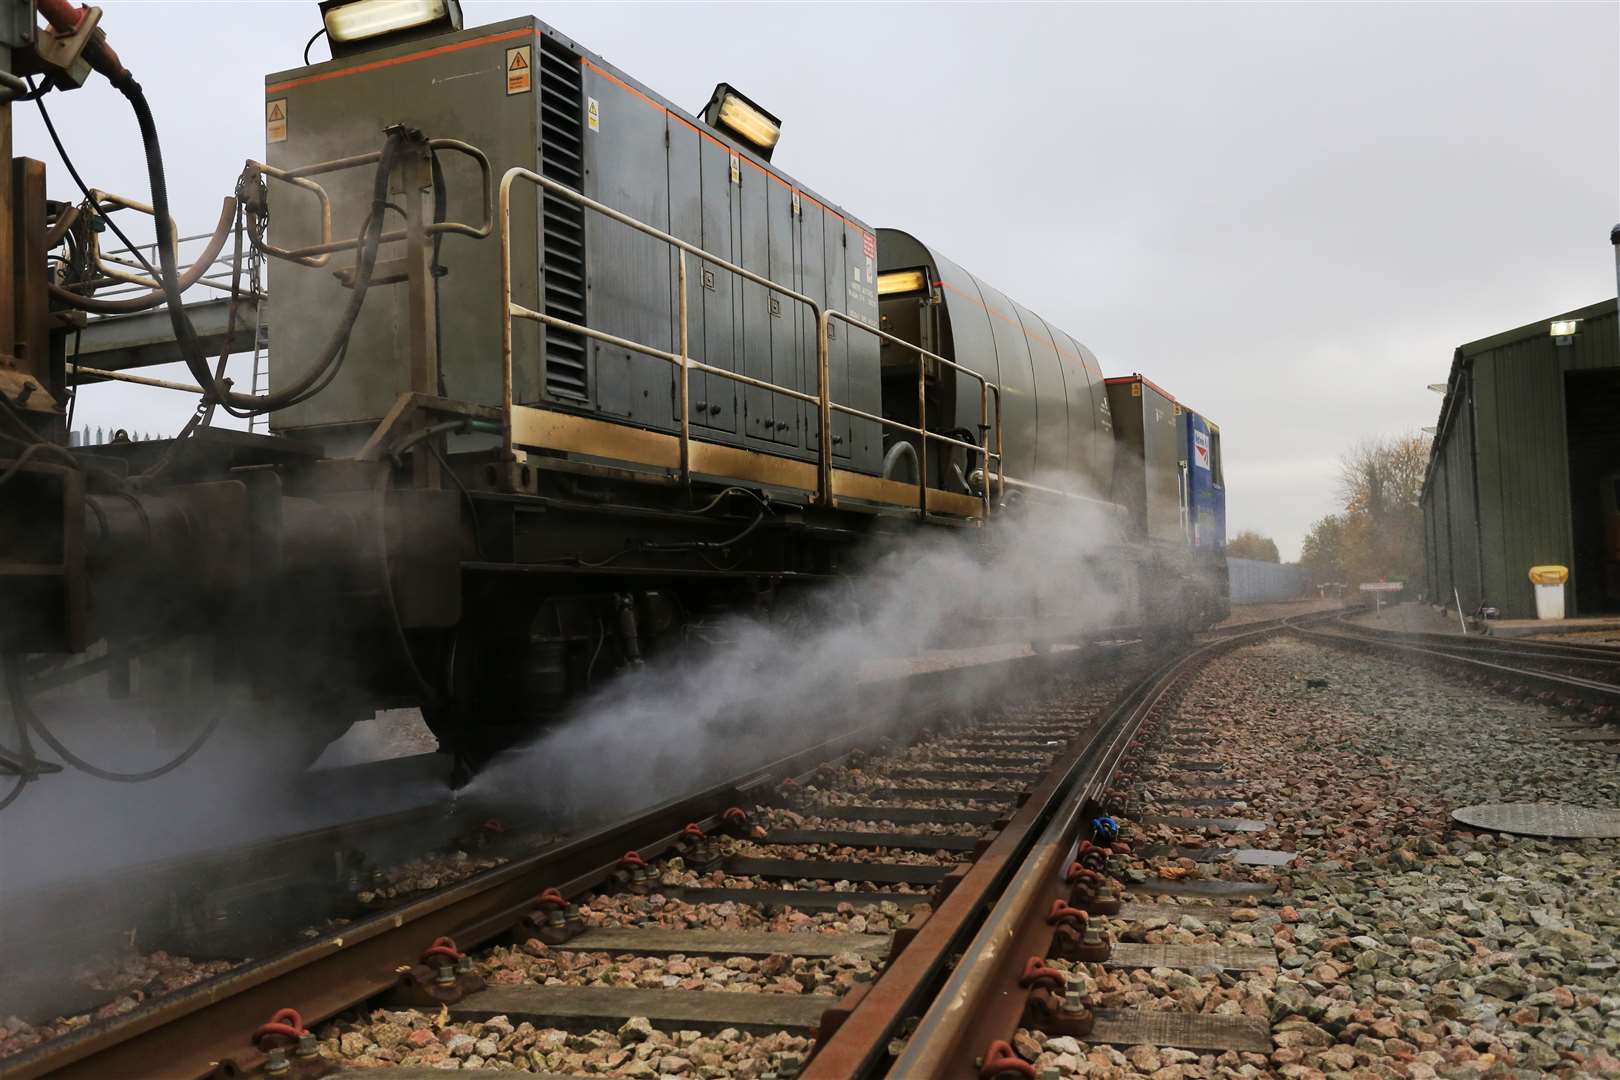 Autumn treatment trains covered more than 70,000 miles of track last year.